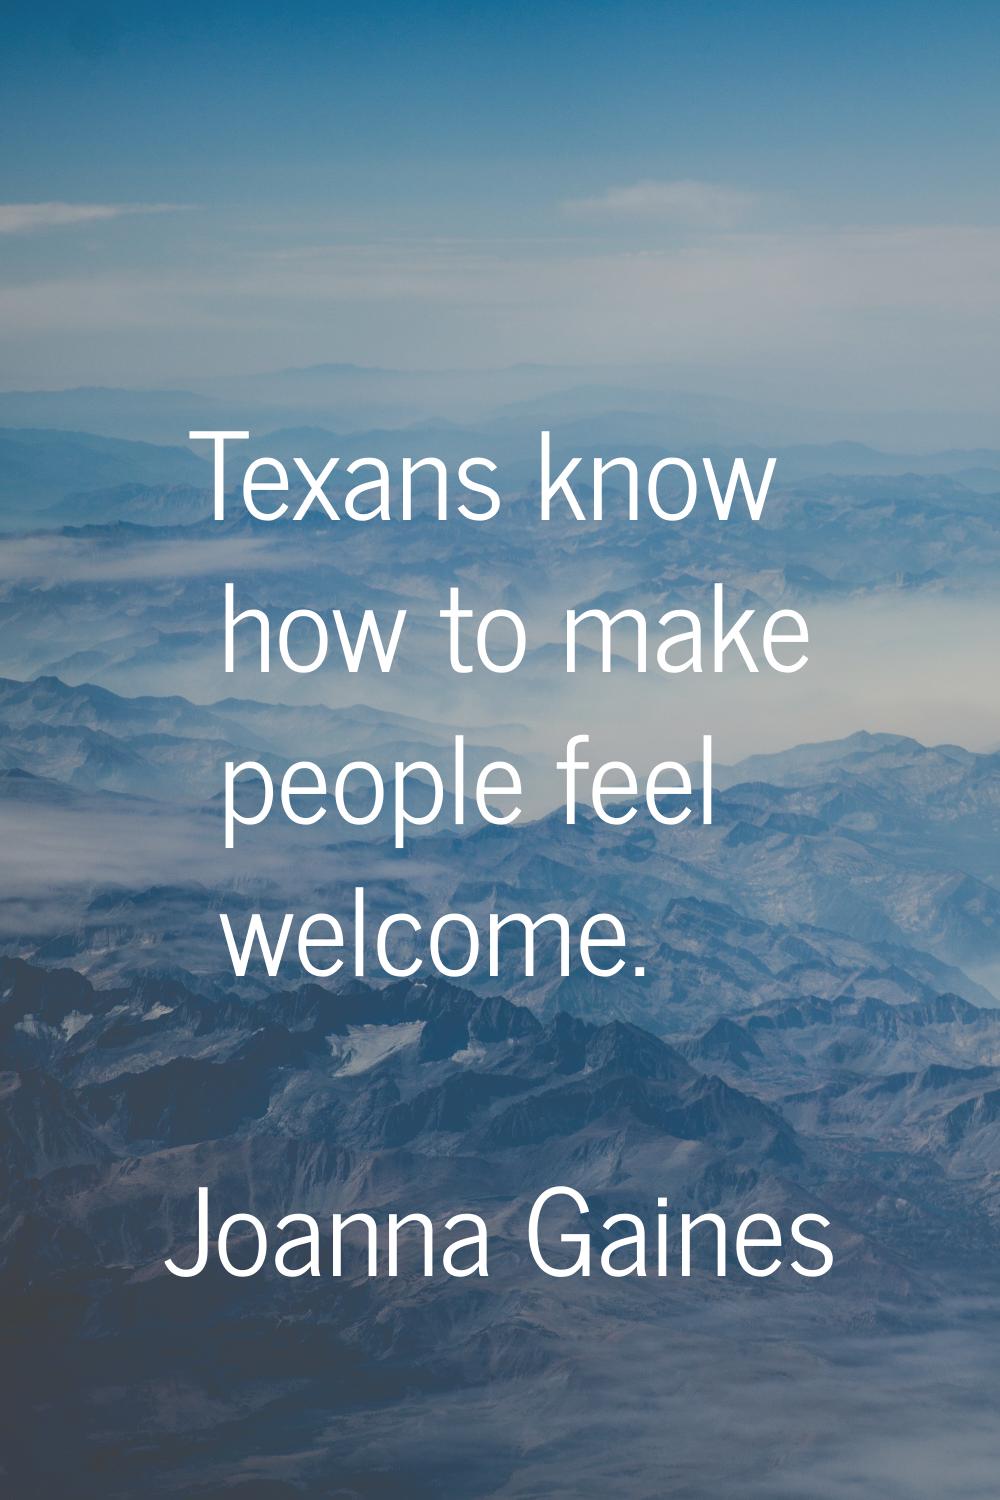 Texans know how to make people feel welcome.